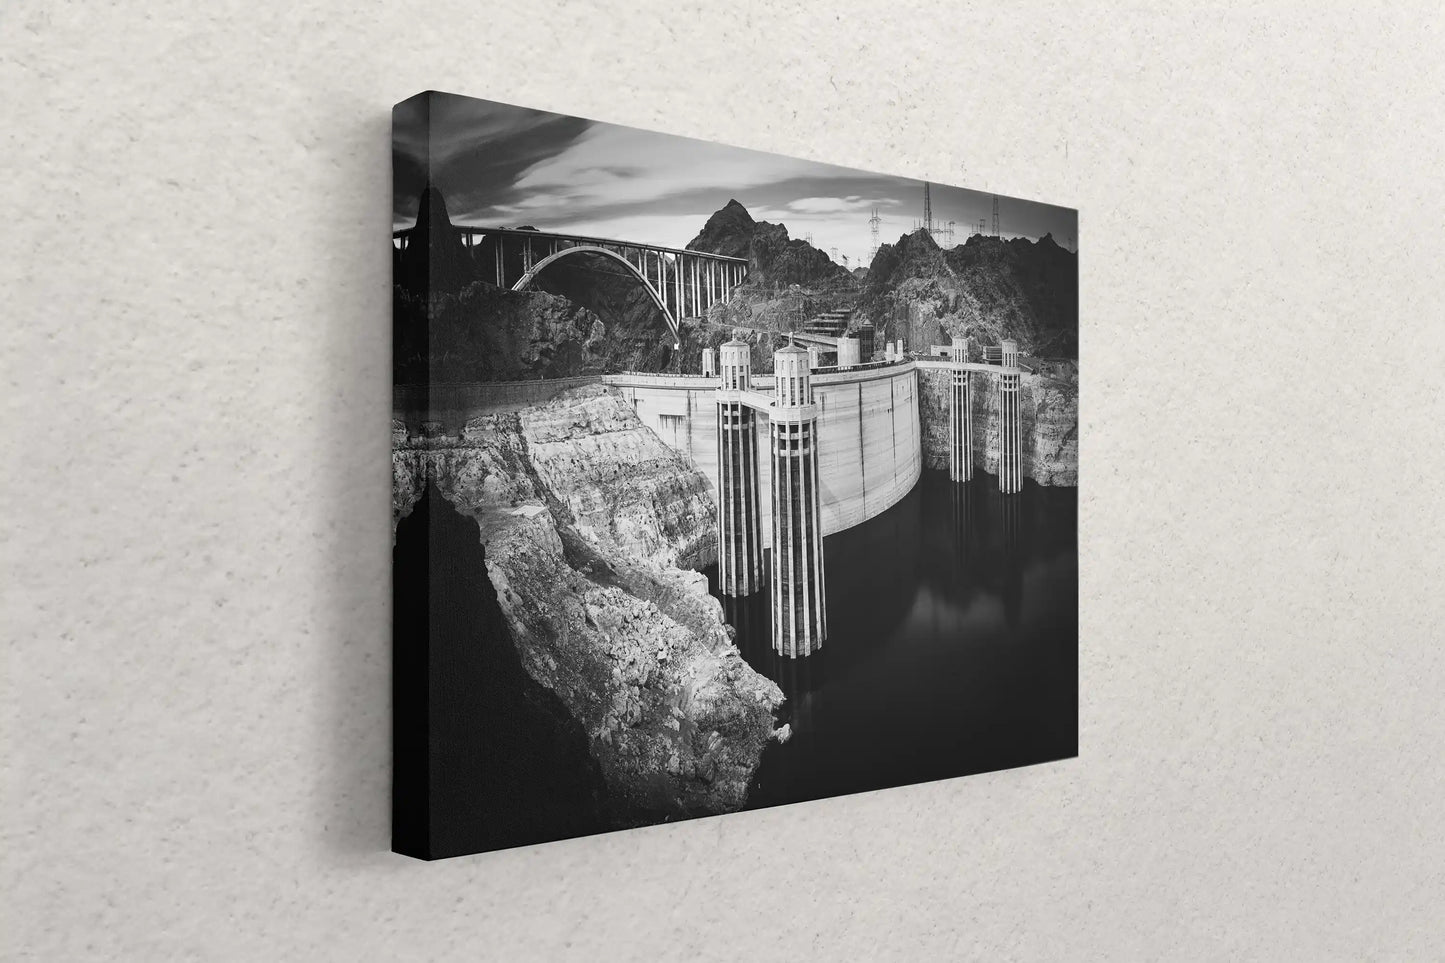 A canvas wall art piece hanging on a wall, featuring a black and white photograph of the Hoover Dam, ready to add a dramatic touch to any room.